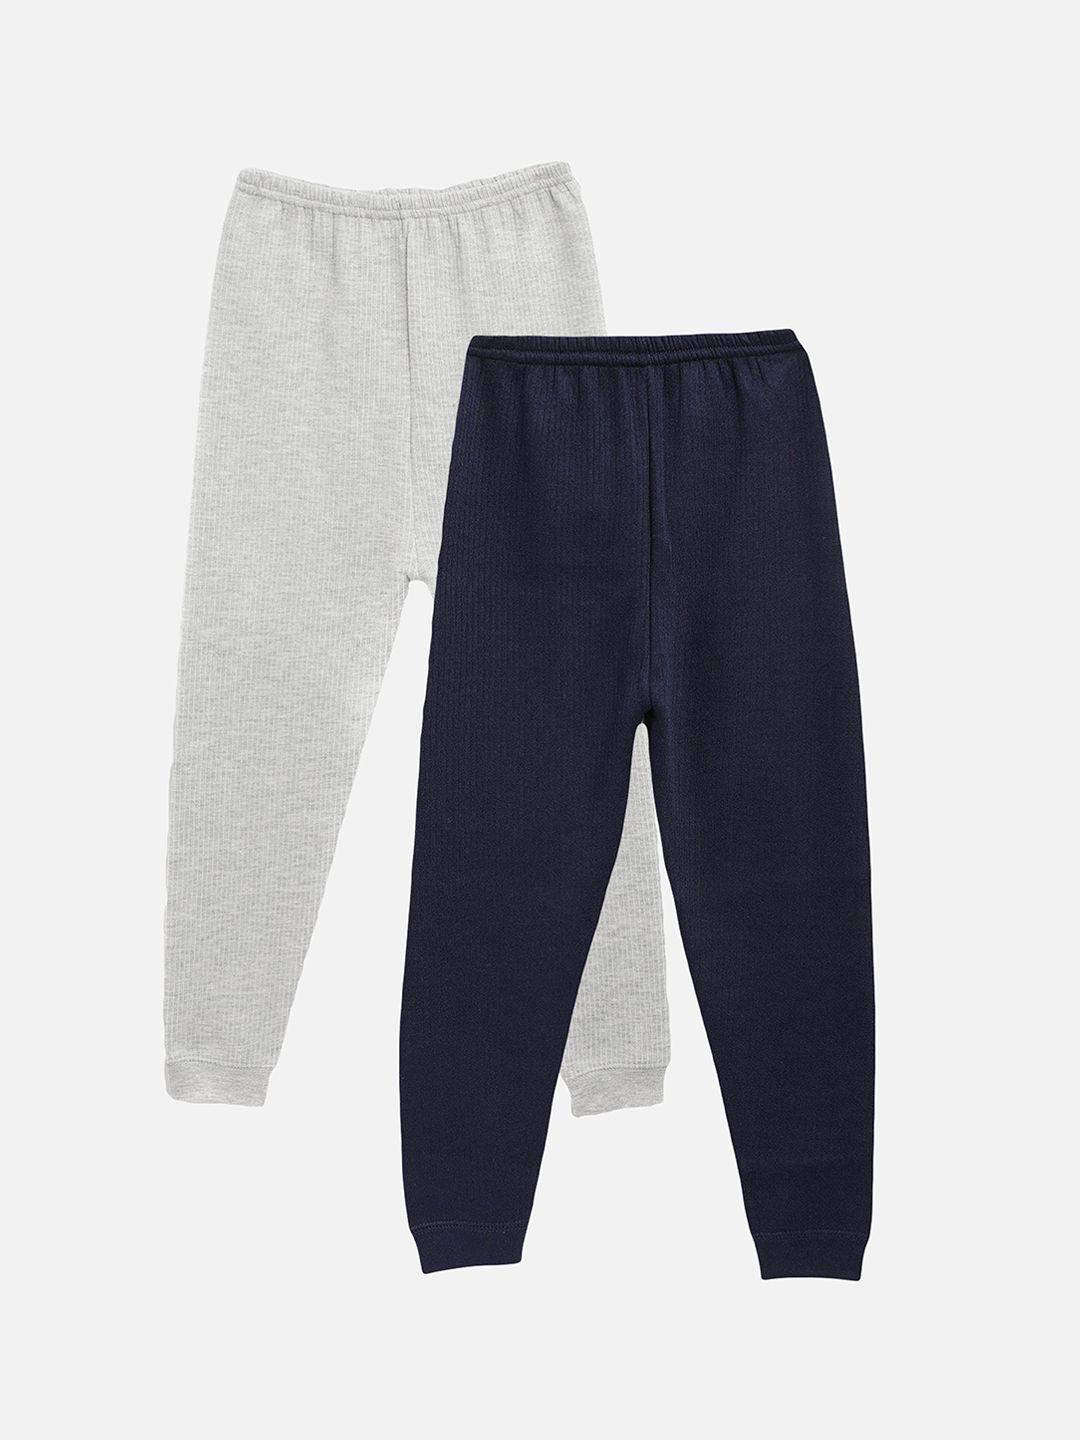 kanvin-boys-pack-of-2-grey-&-navy-blue-solid-thermal-bottoms